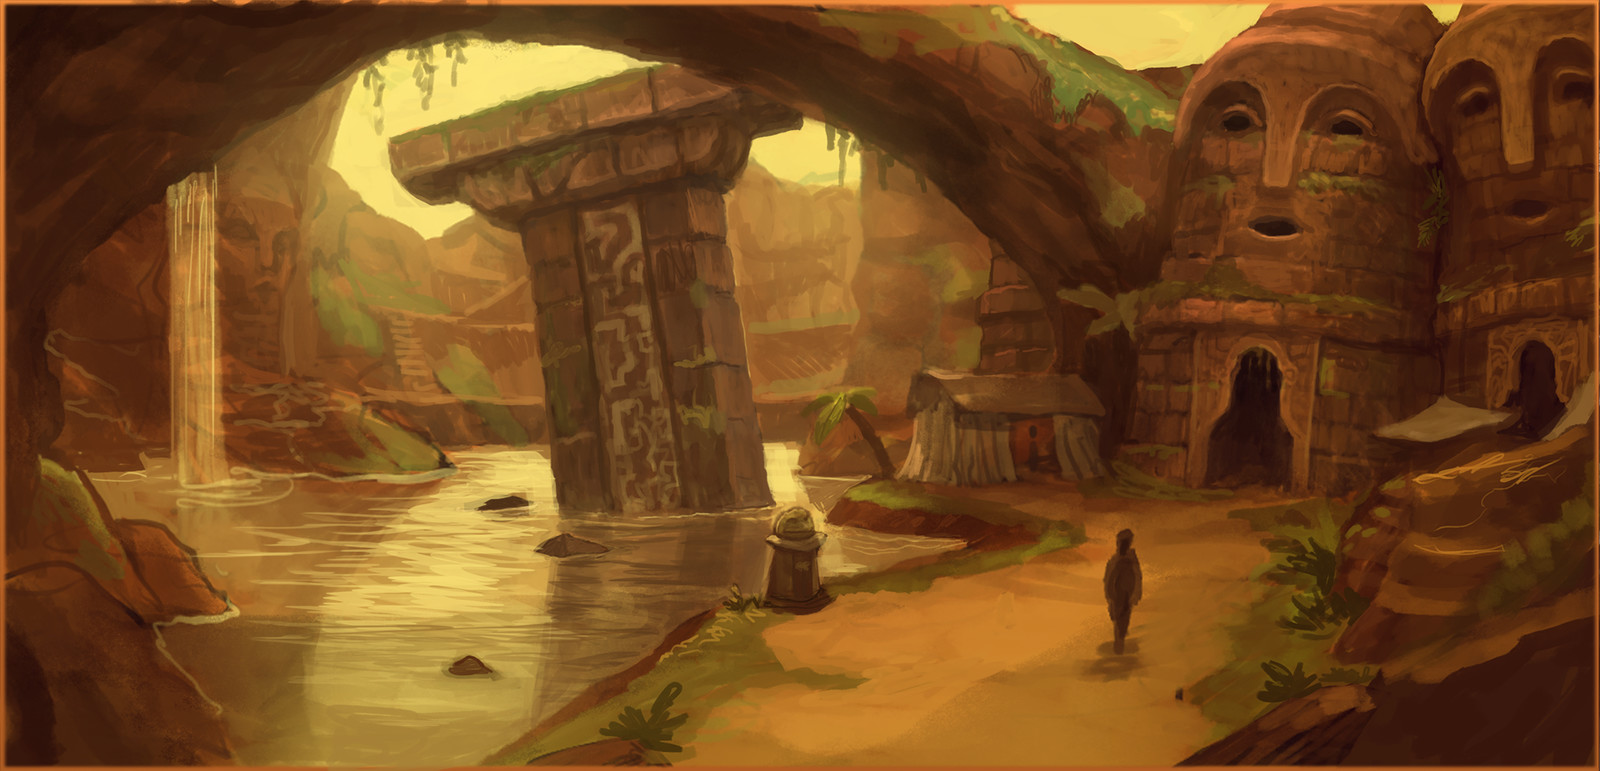 Concept for the oasis environment 